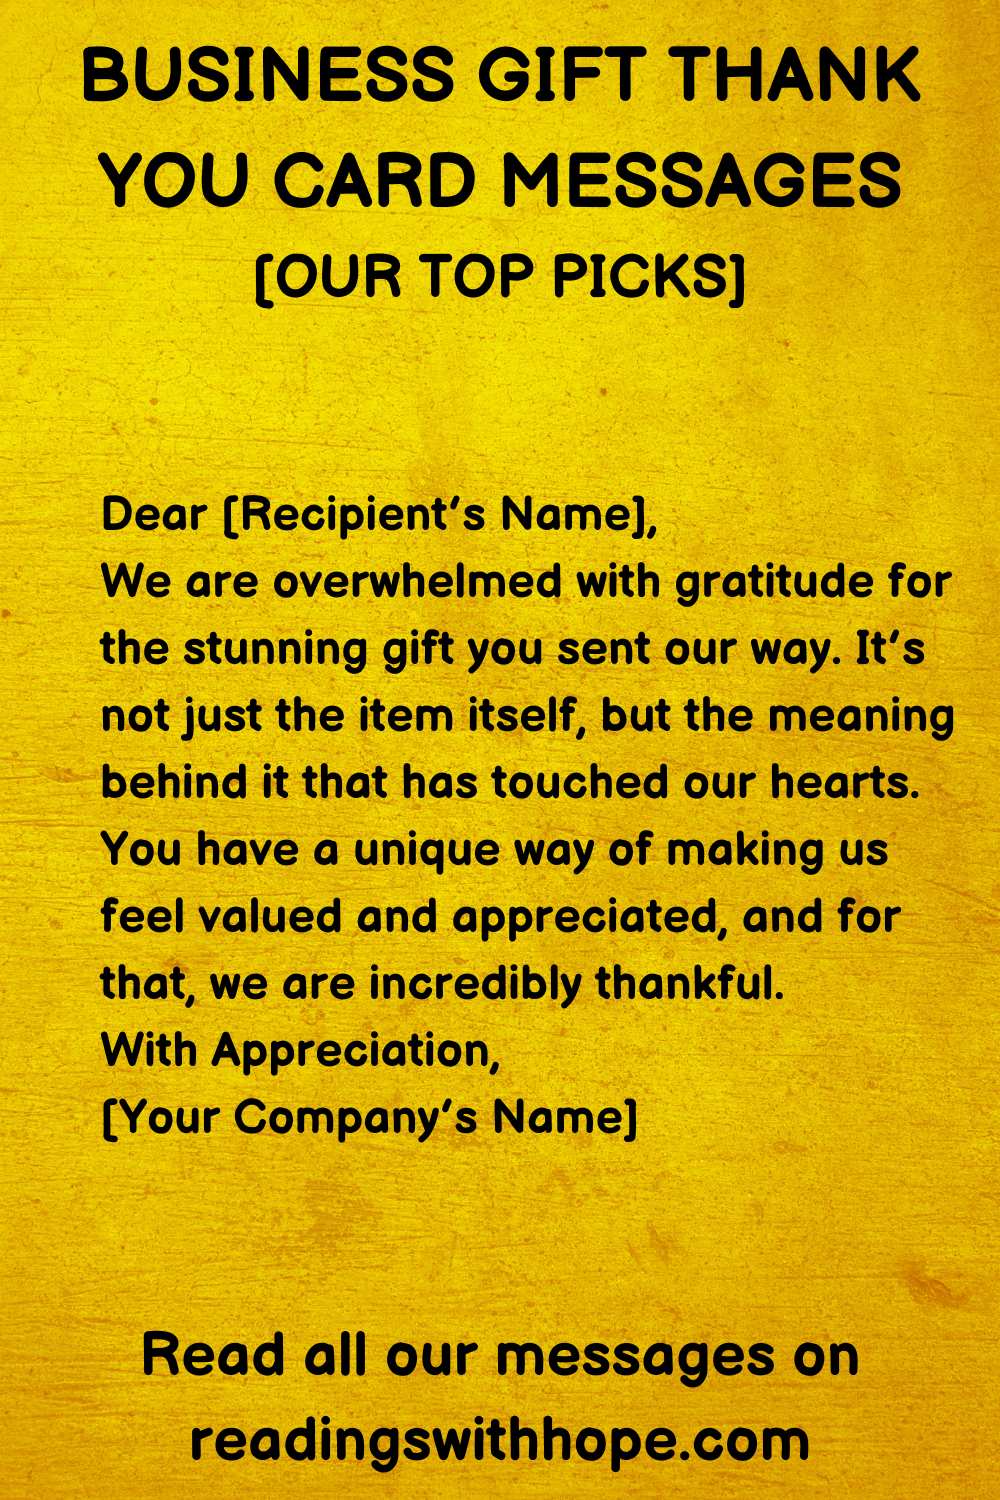 Business Gift Thank You Card Messages
